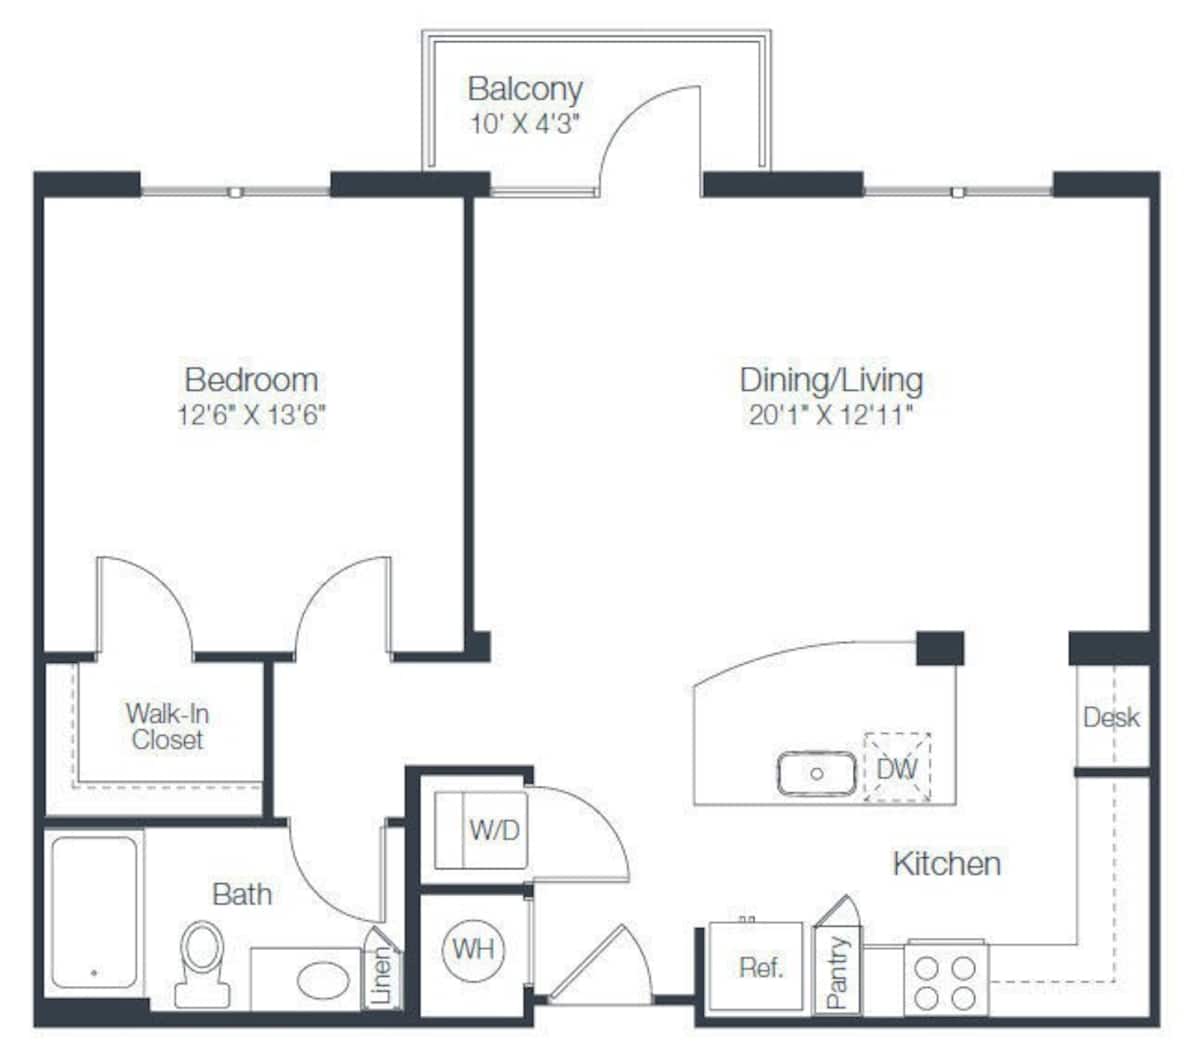 Floorplan diagram for A4a, showing 1 bedroom